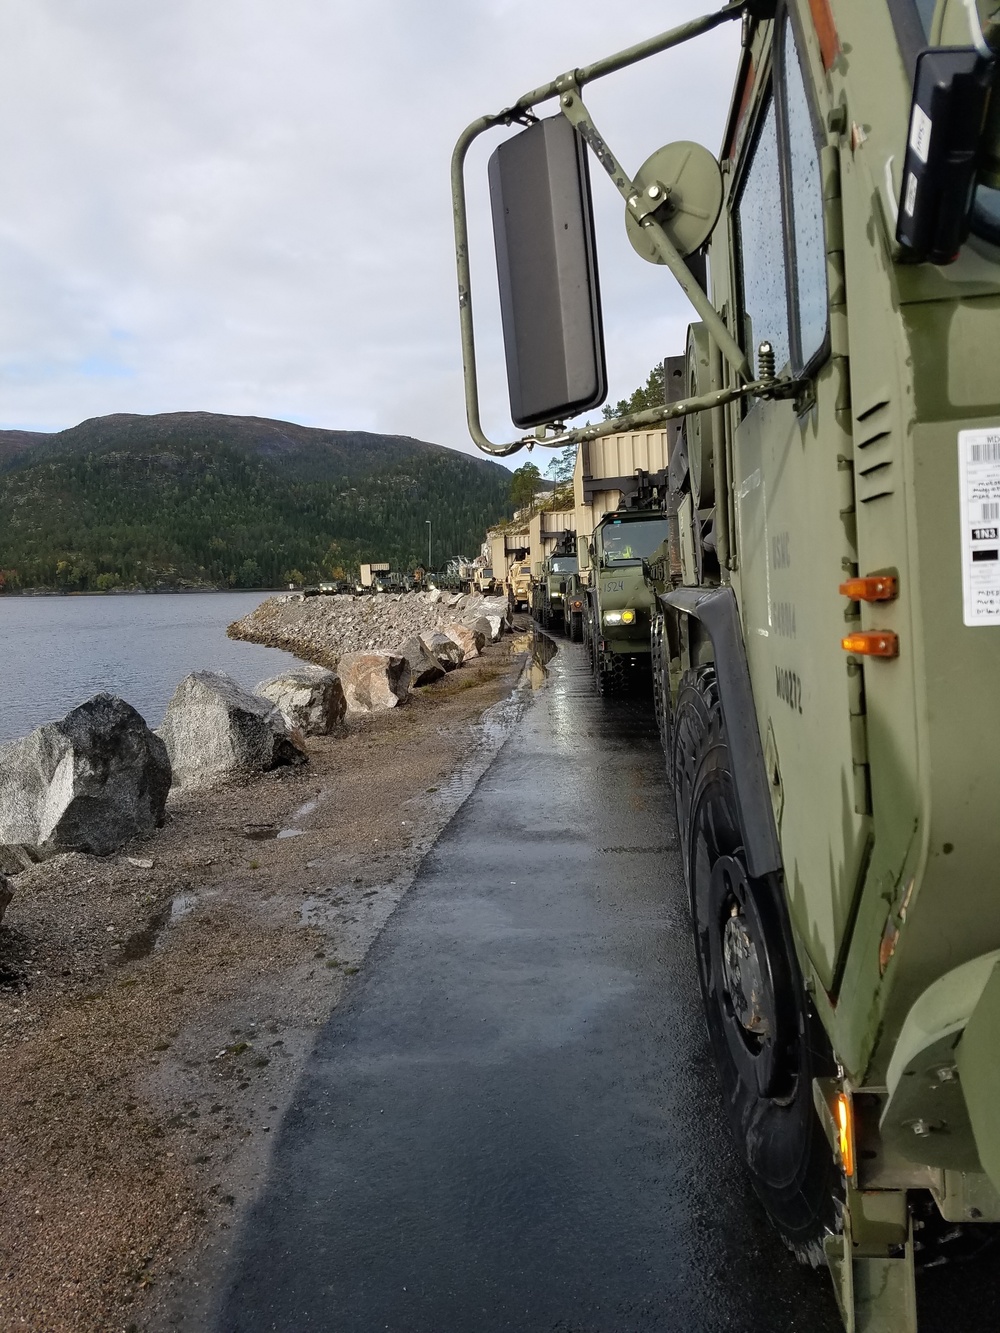 Marines offload initial equipment for Trident Juncture in Norway